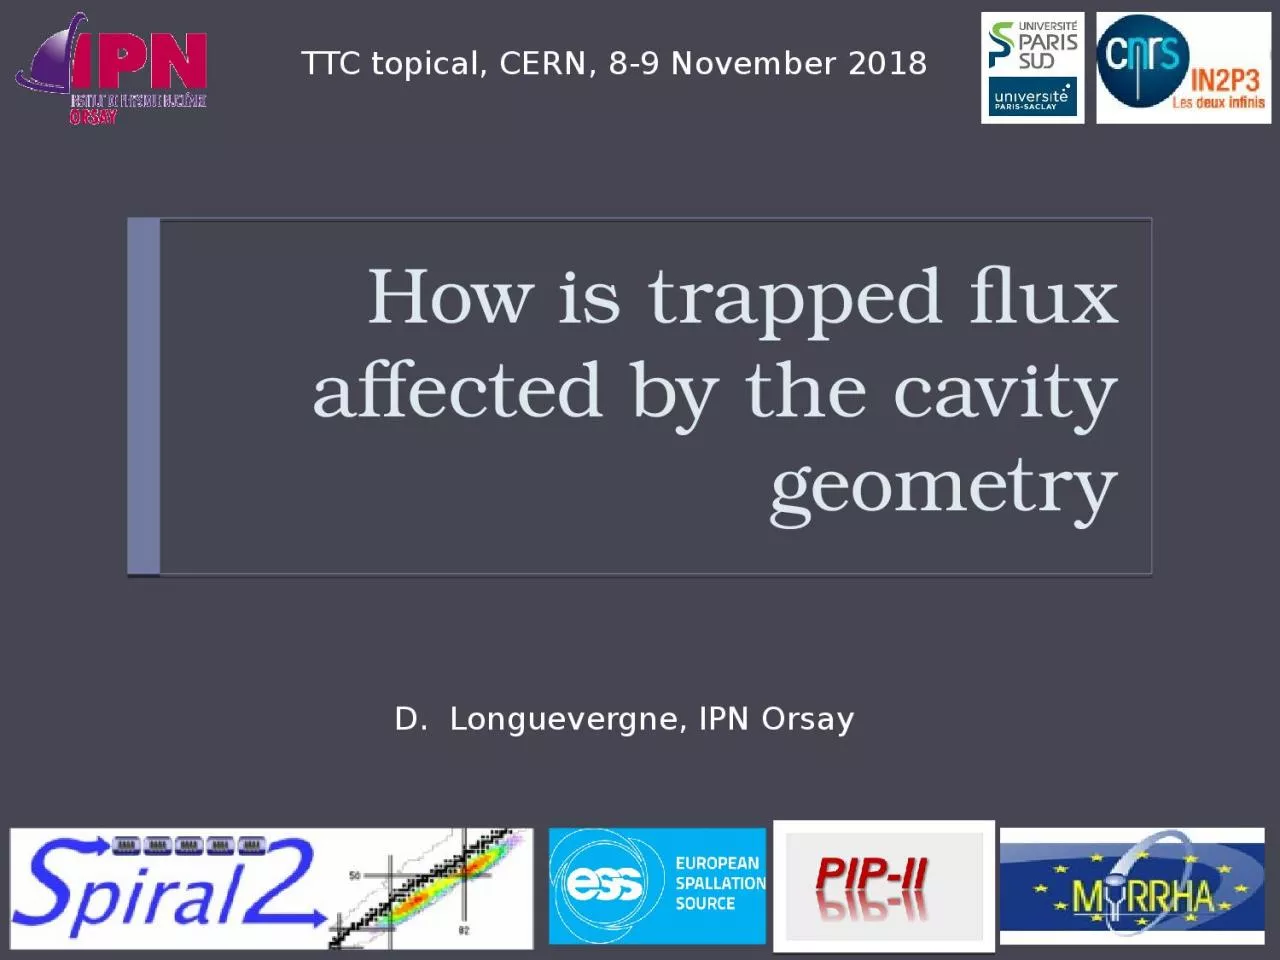 How is trapped flux affected by the cavity geometry